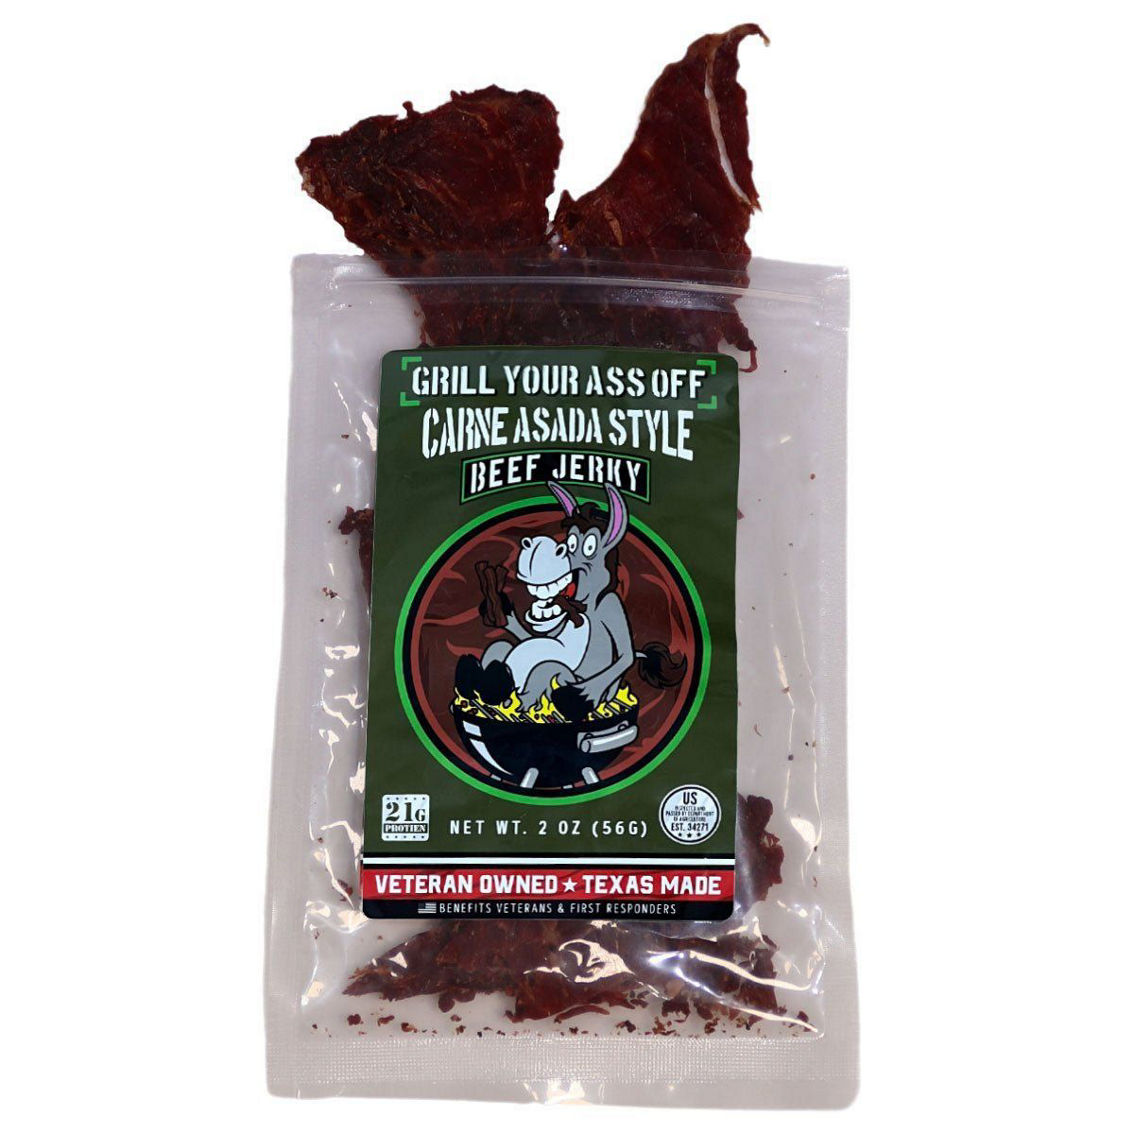 Grill Your A** Off Carne Asada Style Beef Jerky - Image 2 of 2